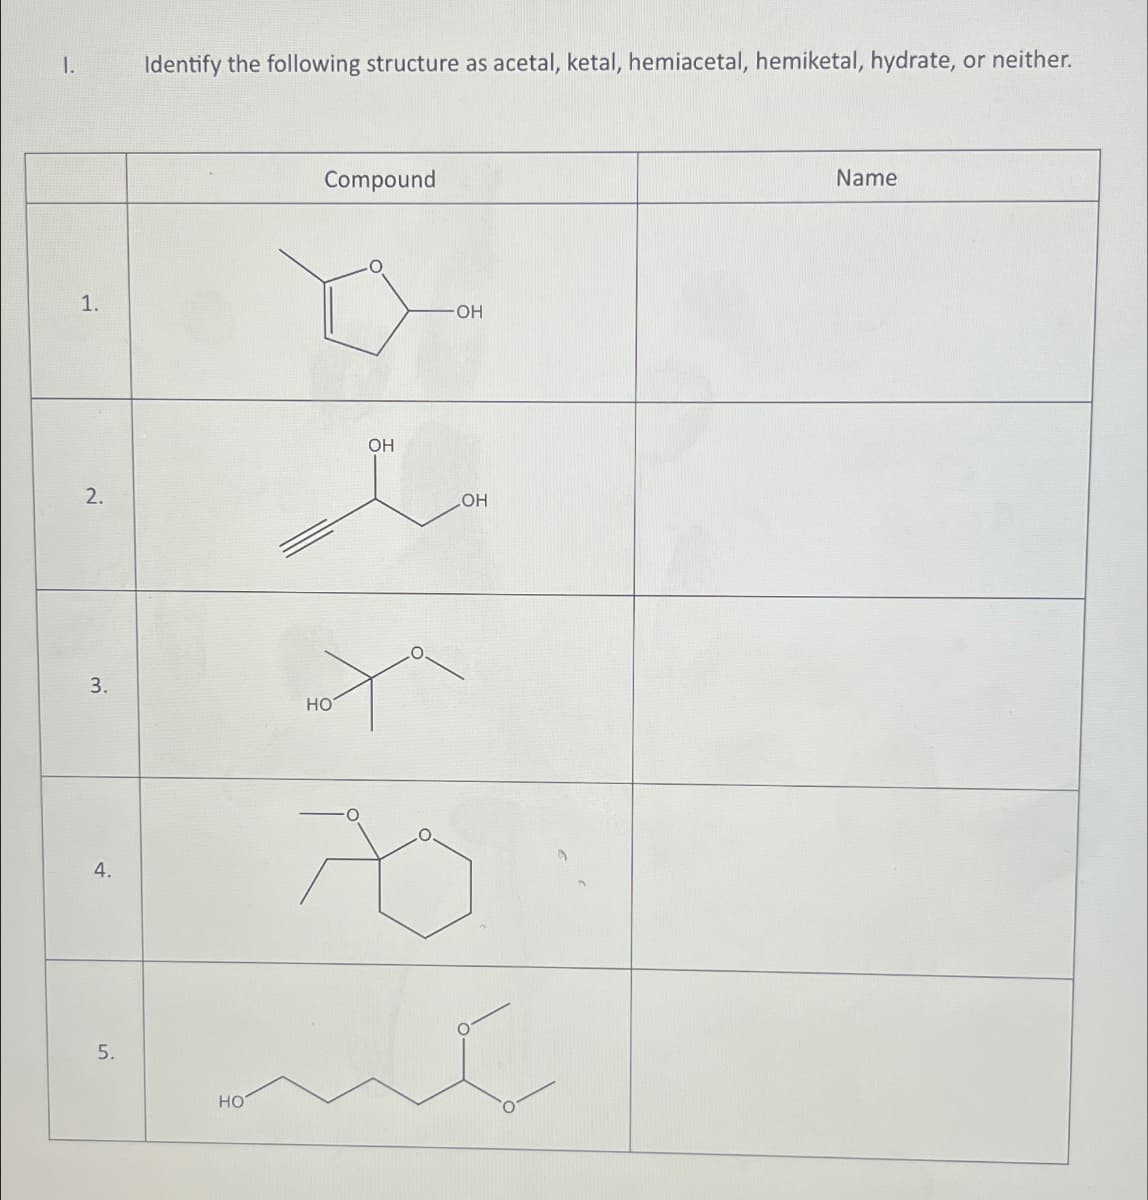 1.
1.
2.
Identify the following structure as acetal, ketal, hemiacetal, hemiketal, hydrate, or neither.
Compound
٥٠
-OH
OH
متر
COH
مام
3.
HO
4.
70
5.
HO
Name